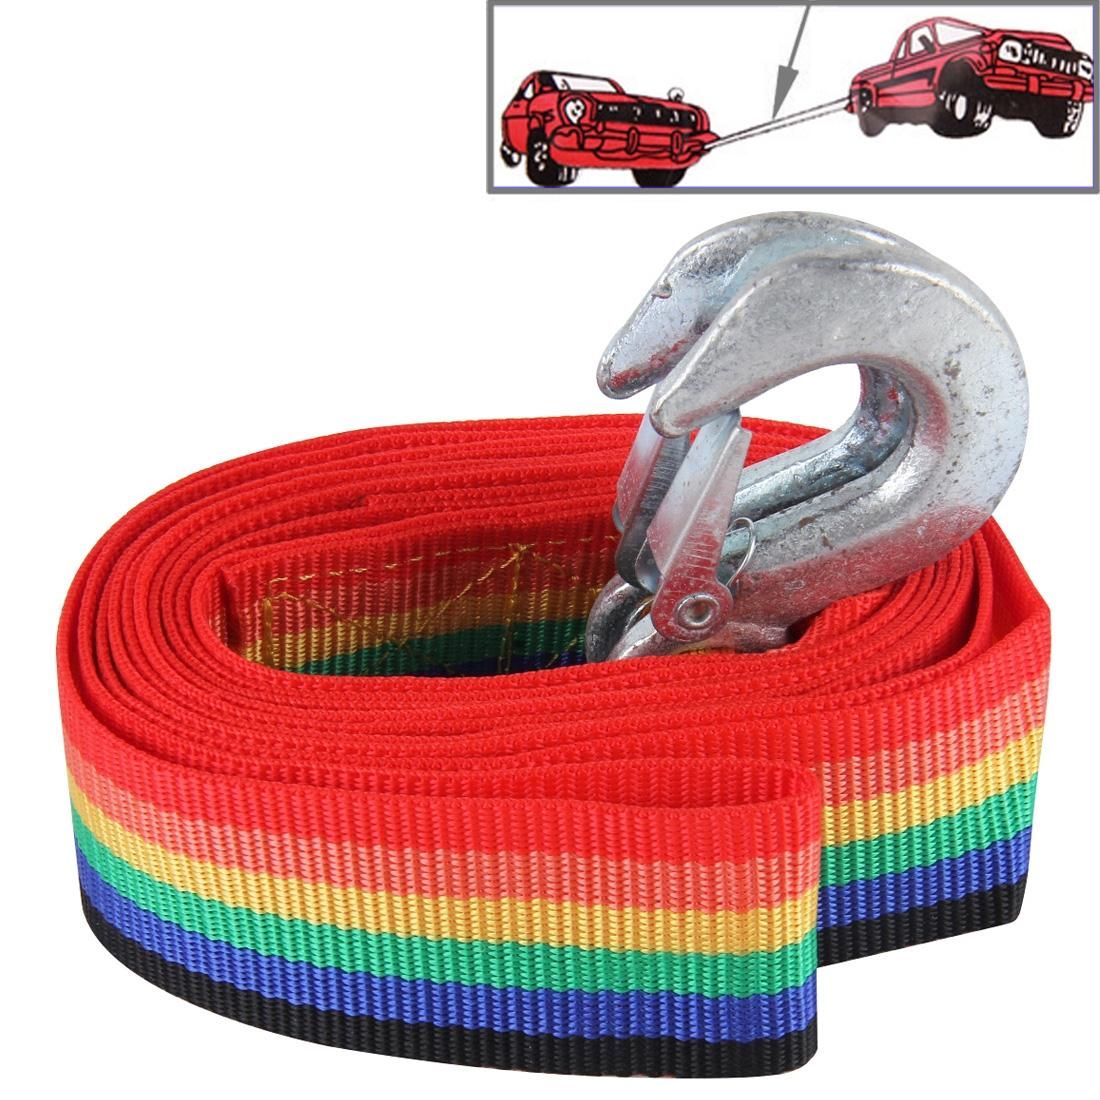 ZONGYUAN 3m�4cm 3 Ton Car Towing Rope Straps with Two Hooks High Strength Cable Cord Heavy Duty Recovery Securing Accessories for Cars Trucks (Colour)